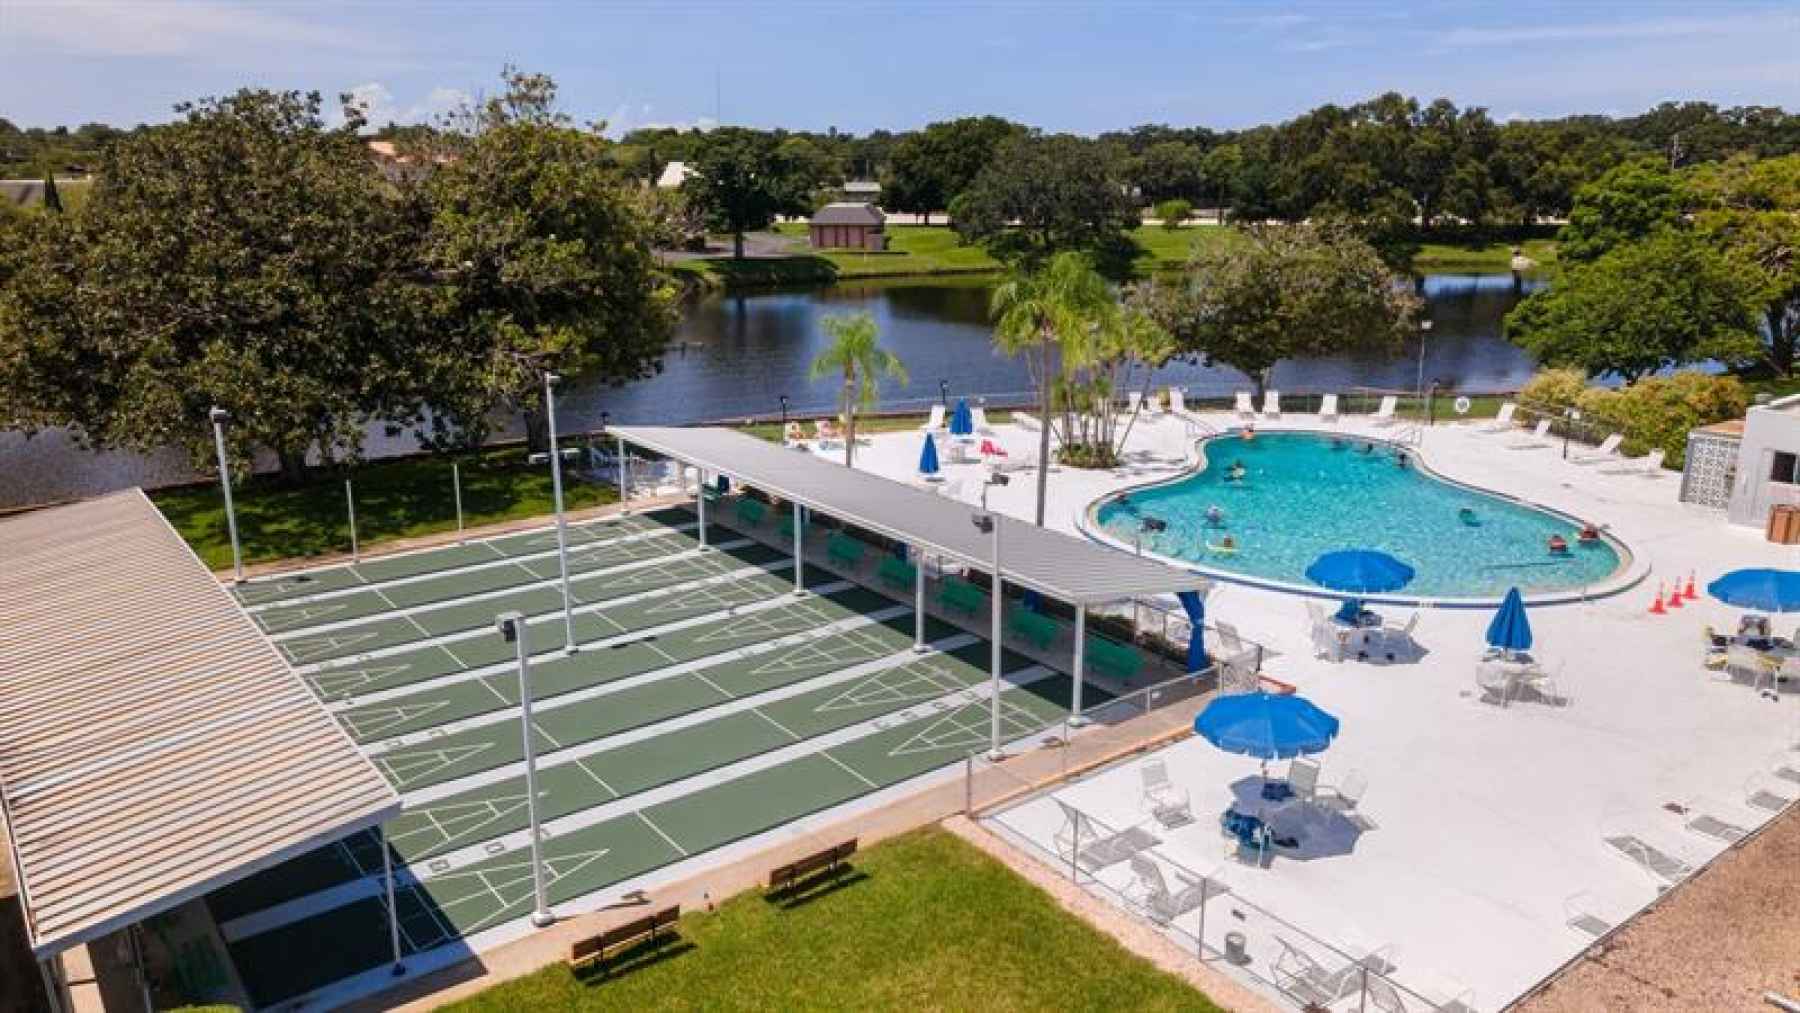 Shuffle Board Courts and Community Pool/Spa